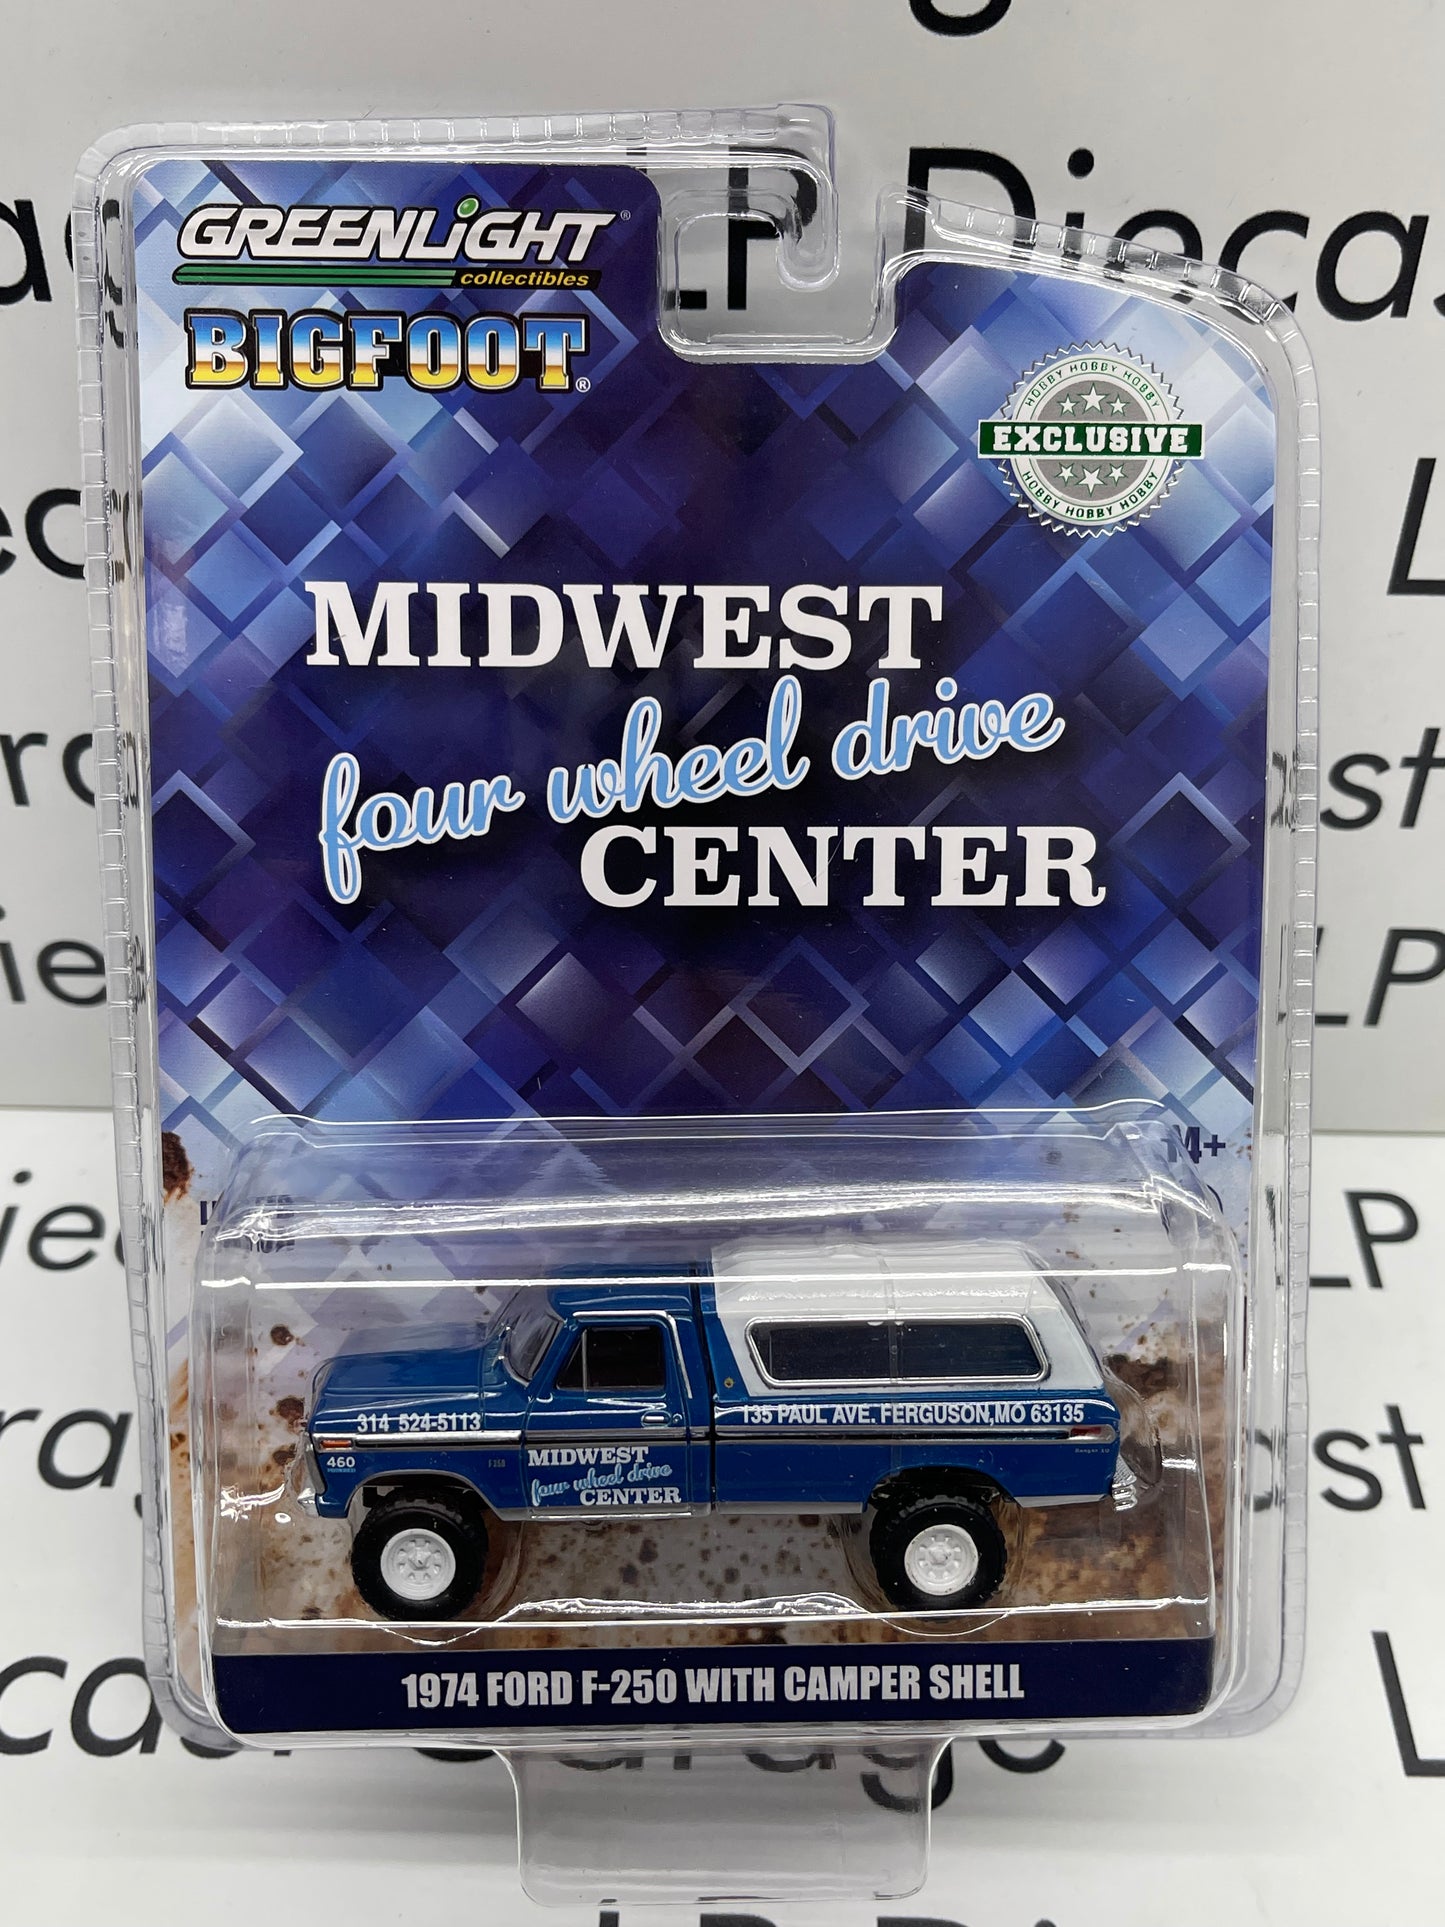 GREENLIGHT 1974 Ford F-250 Midwest Four Wheel Drive Center Hobby Exclusive 1:64 Diecast